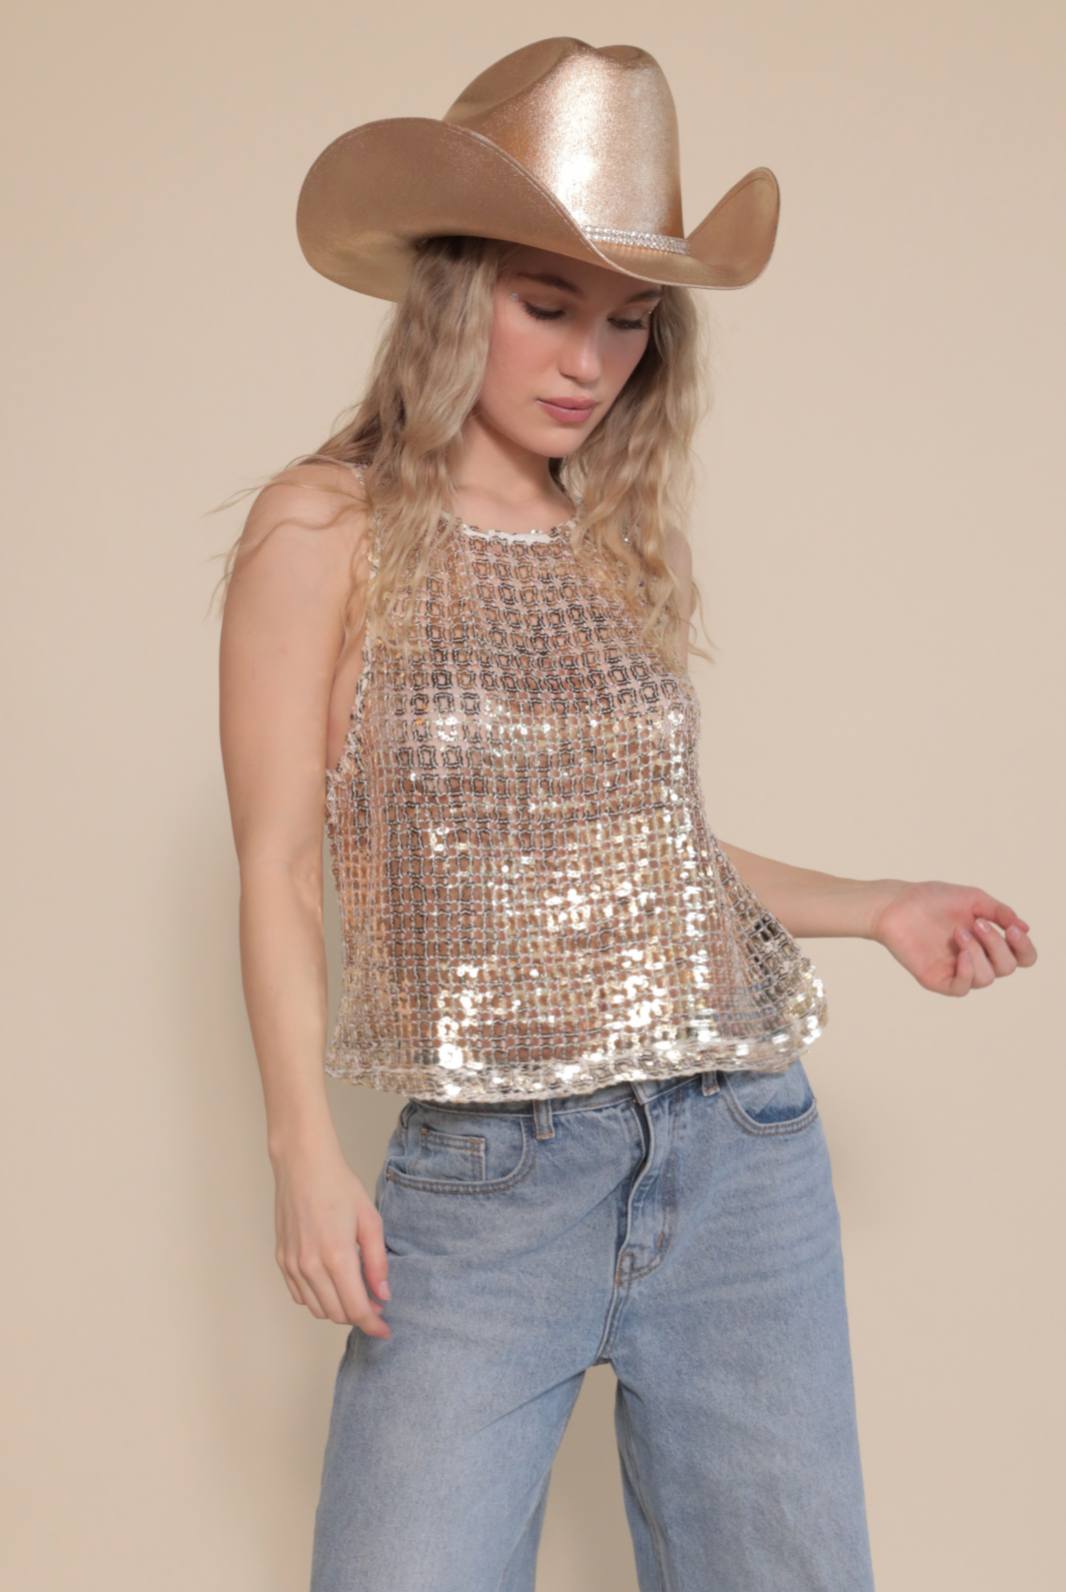 Basic tank with square sequin pattern and gold cowboy hat.